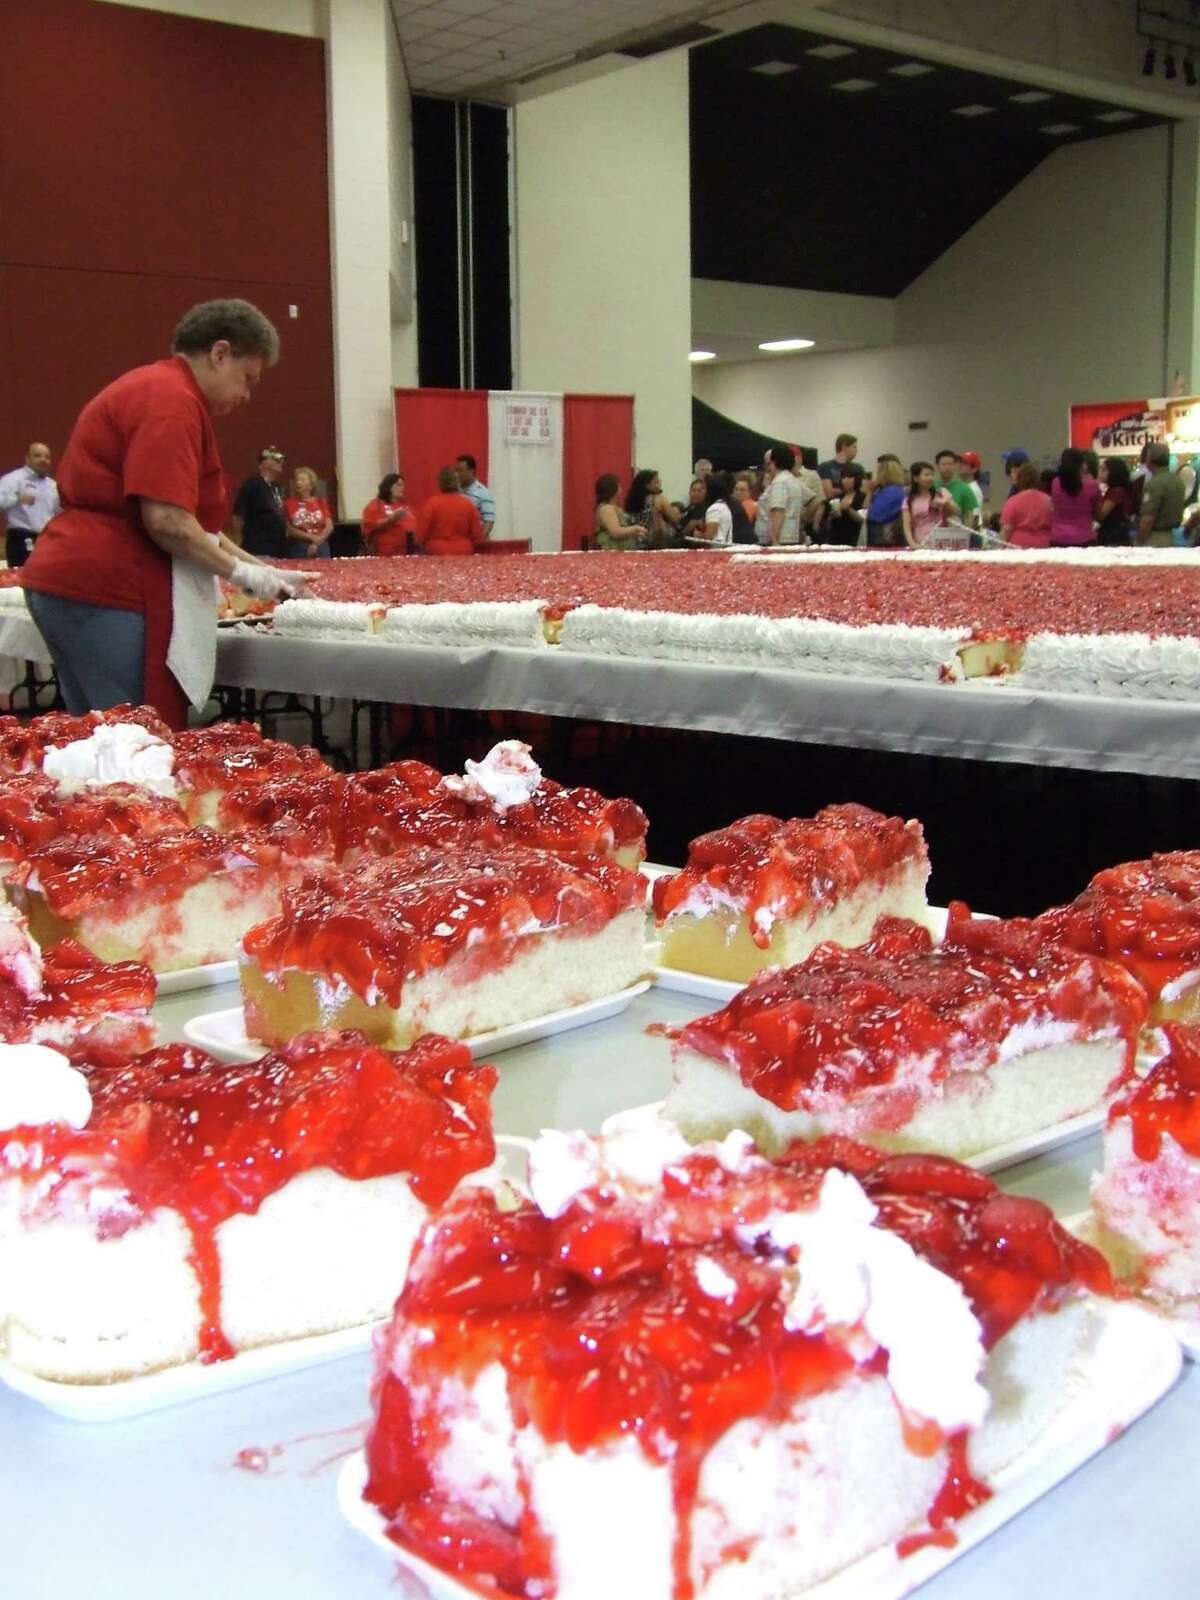 Change coming for this year's Pasadena Strawberry Festival